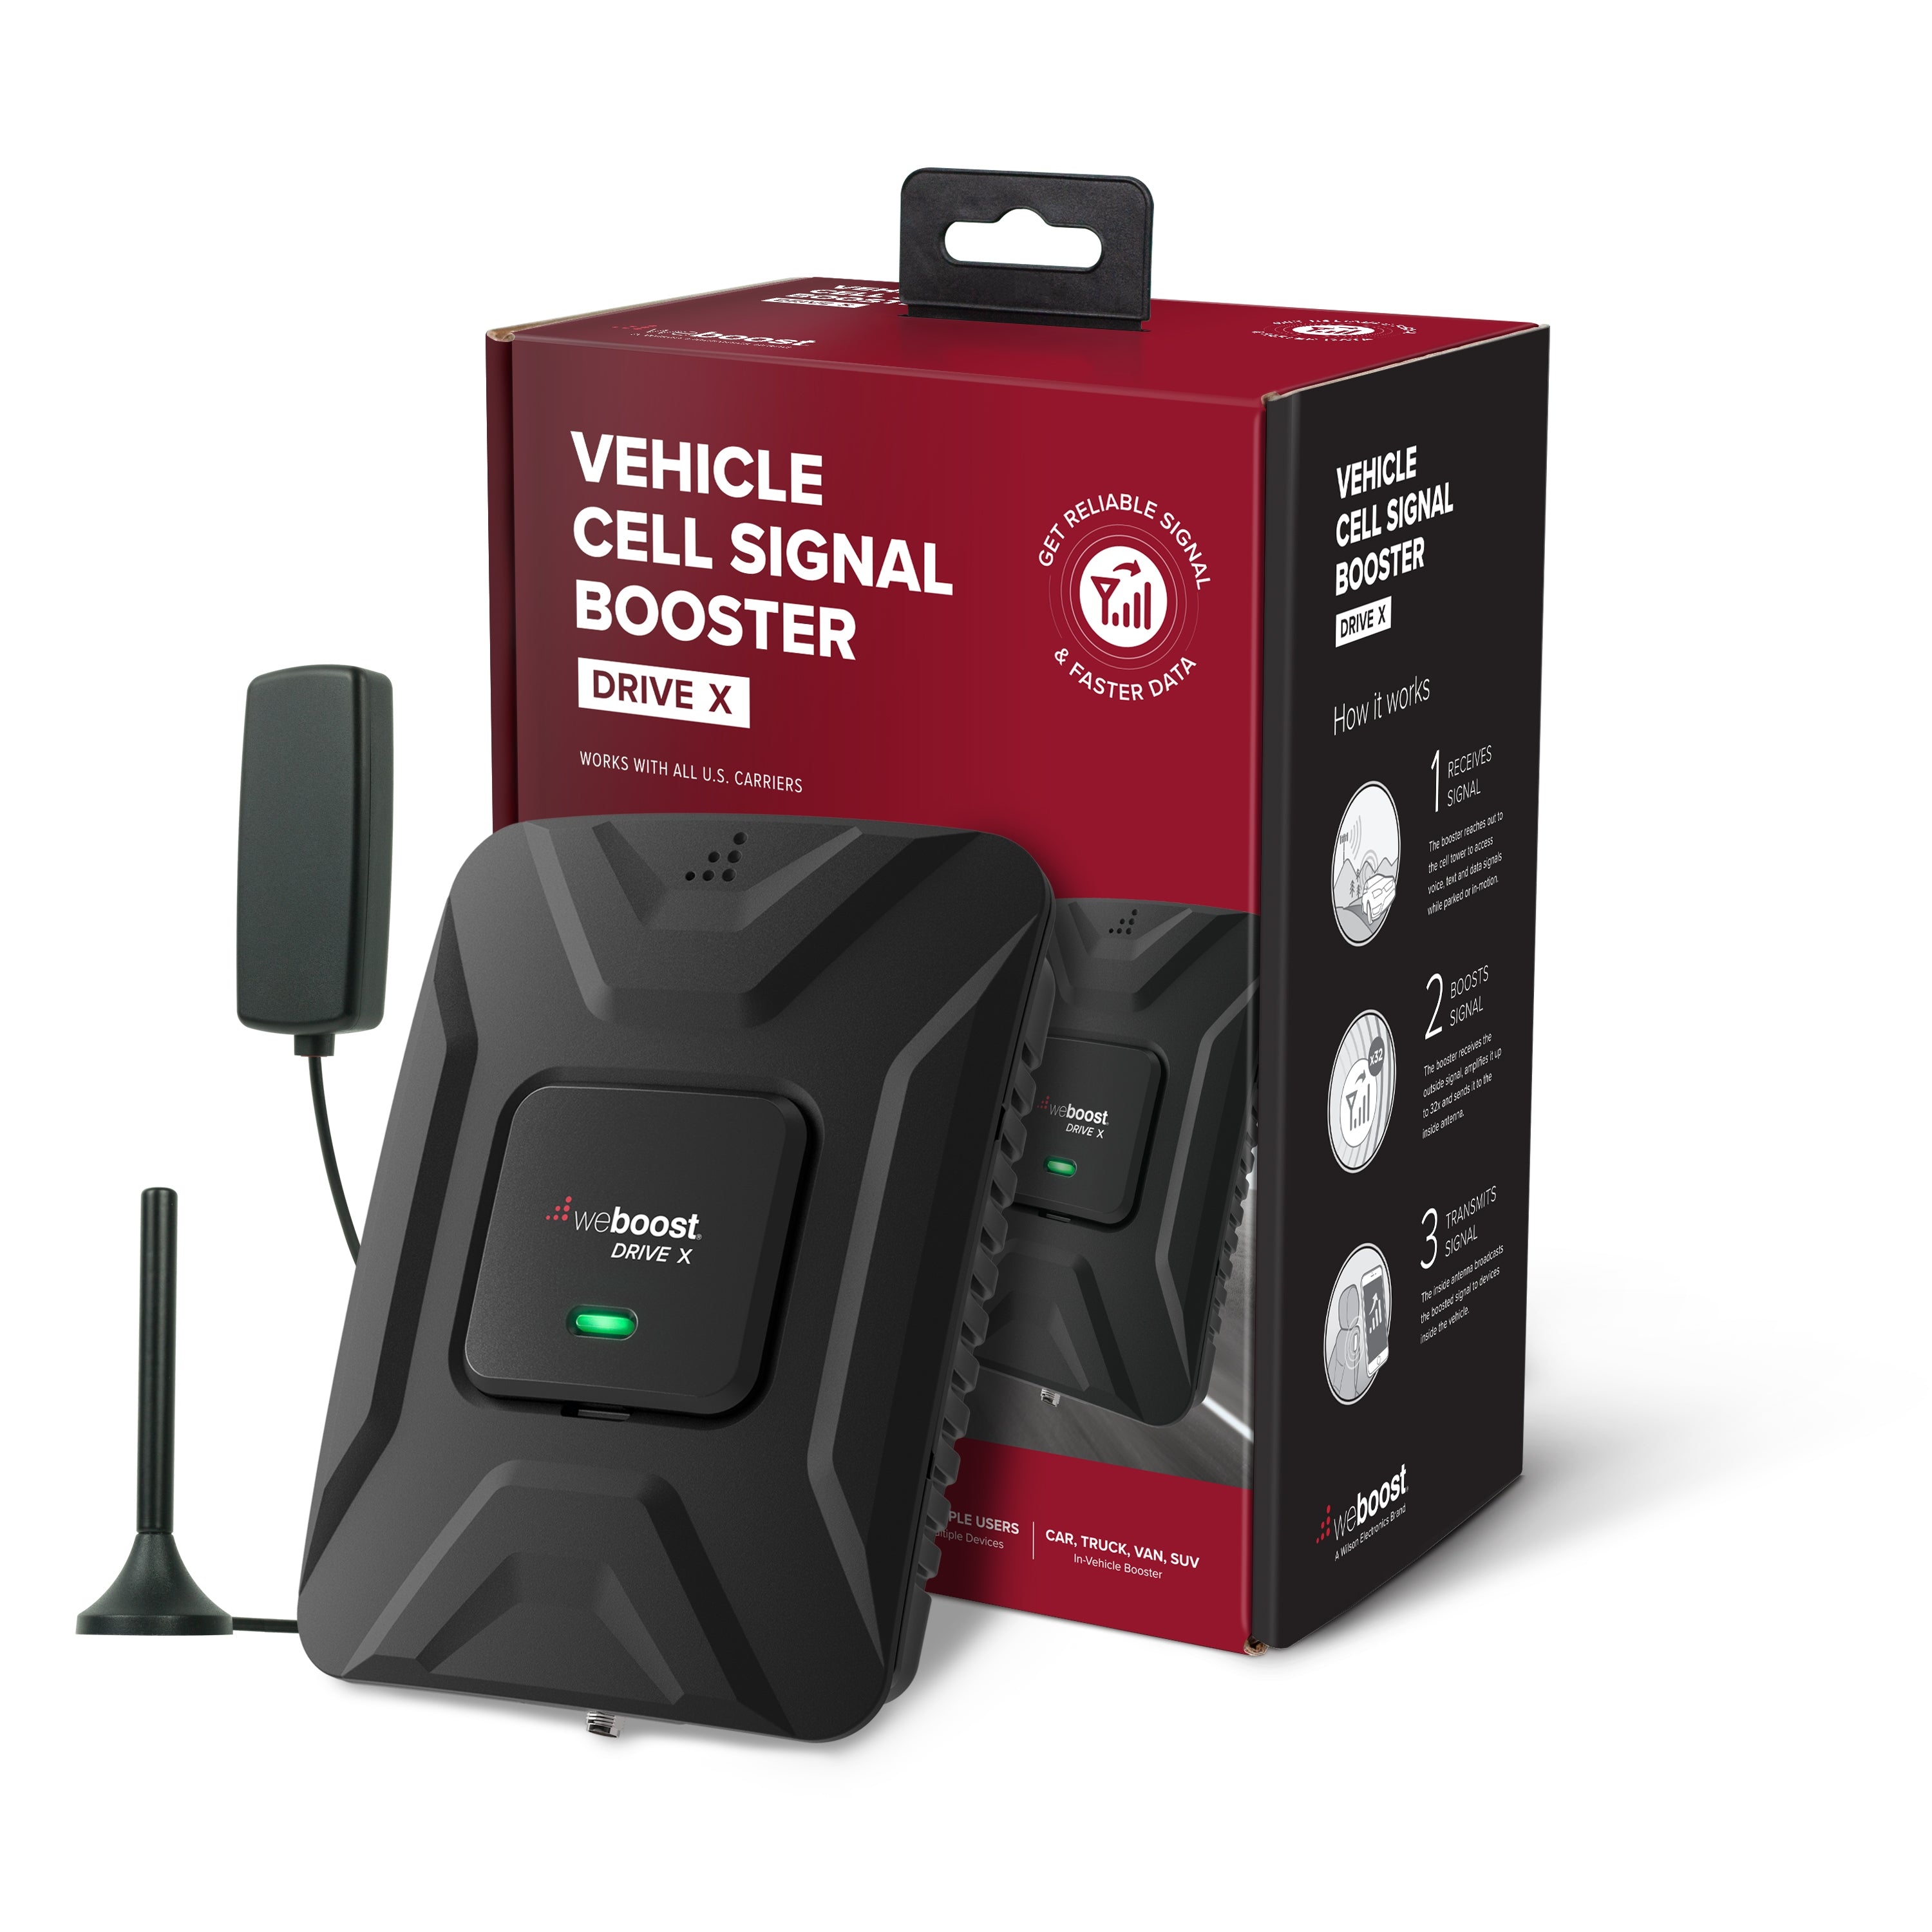 weBoost 475021 Drive X Vehicle Signal Booster